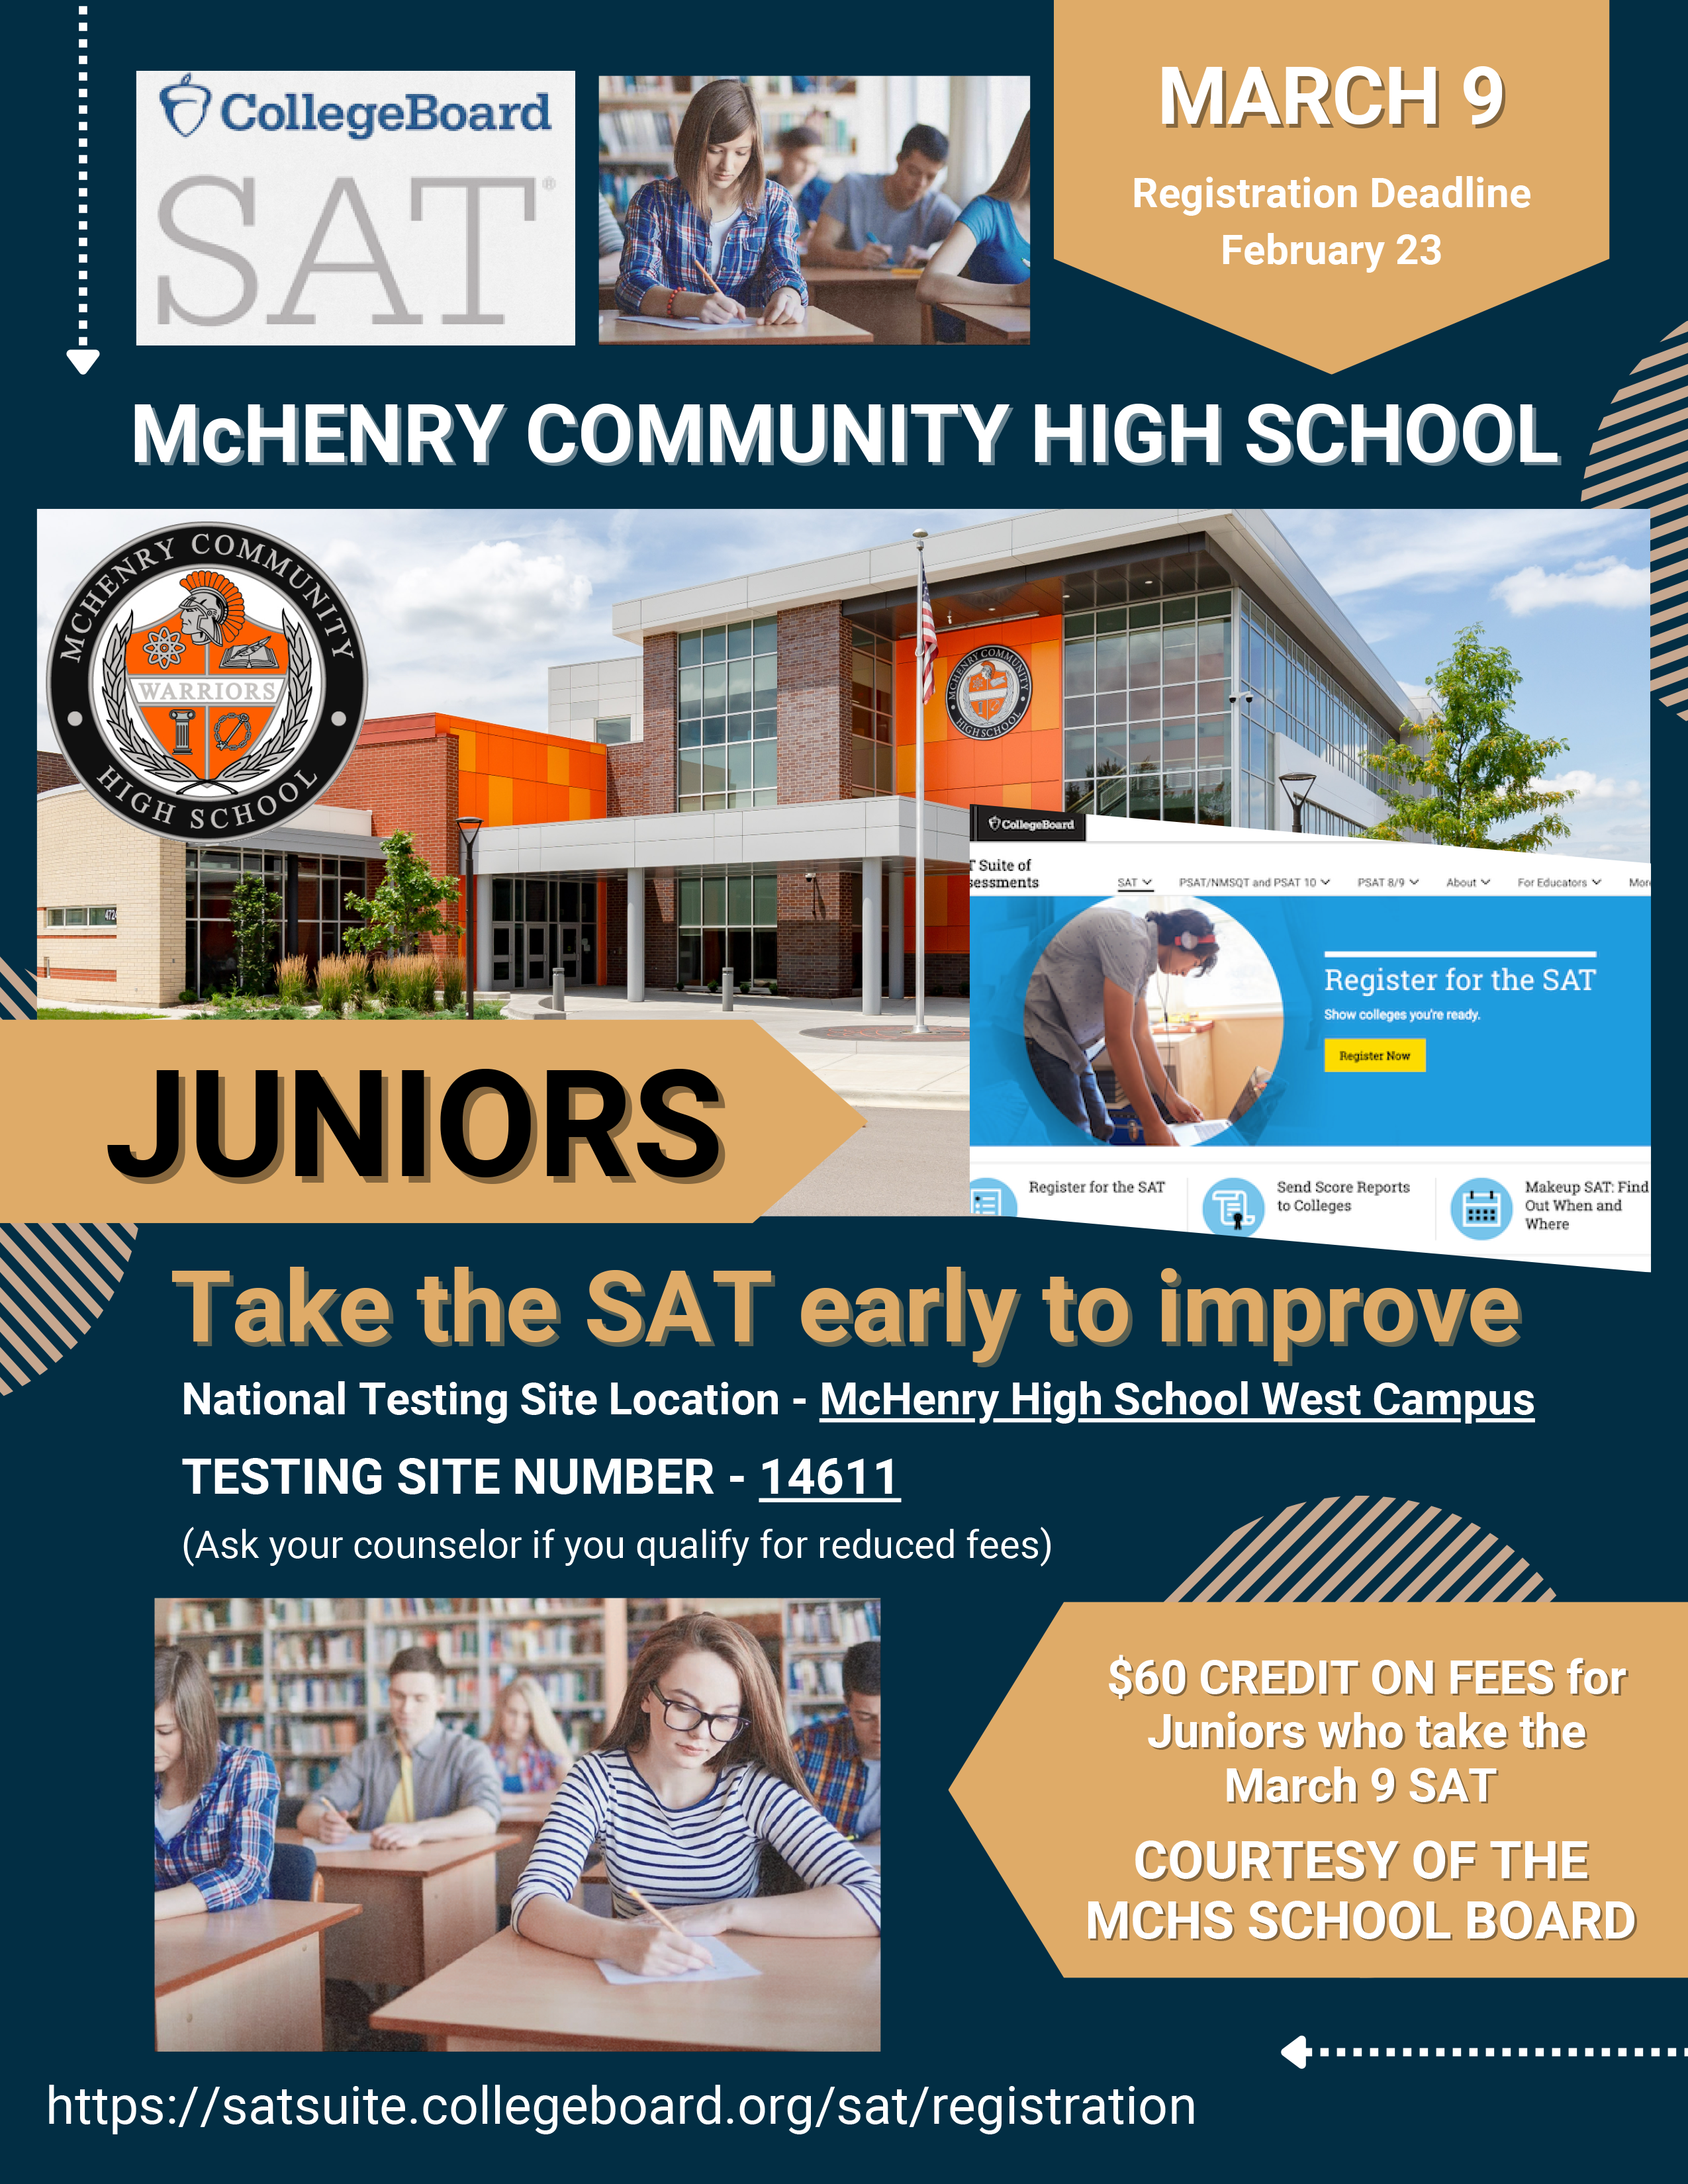 College Board SAT March 9 Registration Deadline February 23. McHenry Community High School. Juniors Take the SAT early to improve. National Testing Site Location McHenry High School West Campus Testing Site Number 14611. (Ask your counselor if you qualify for reduced fees). $60 Credit on fees for Juniors who take the March 9 SAT. Courtesy of the MCHS School Board. satsuite.collegeboard.org/sat/registration